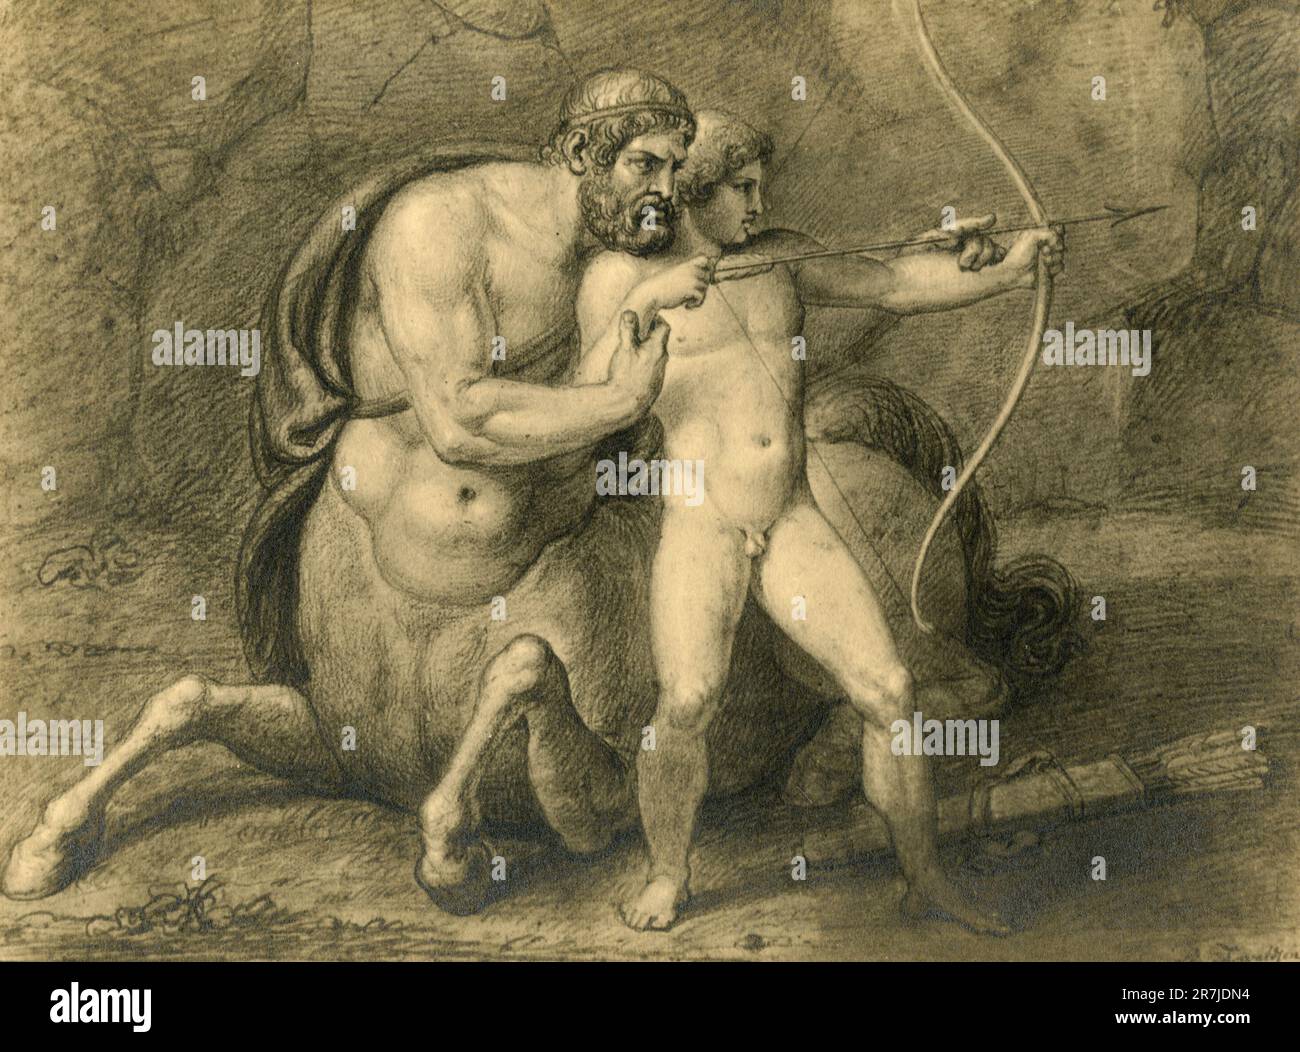 Chiron teaching archery to Achilles, painting by unidentified artist, 1900s Stock Photo